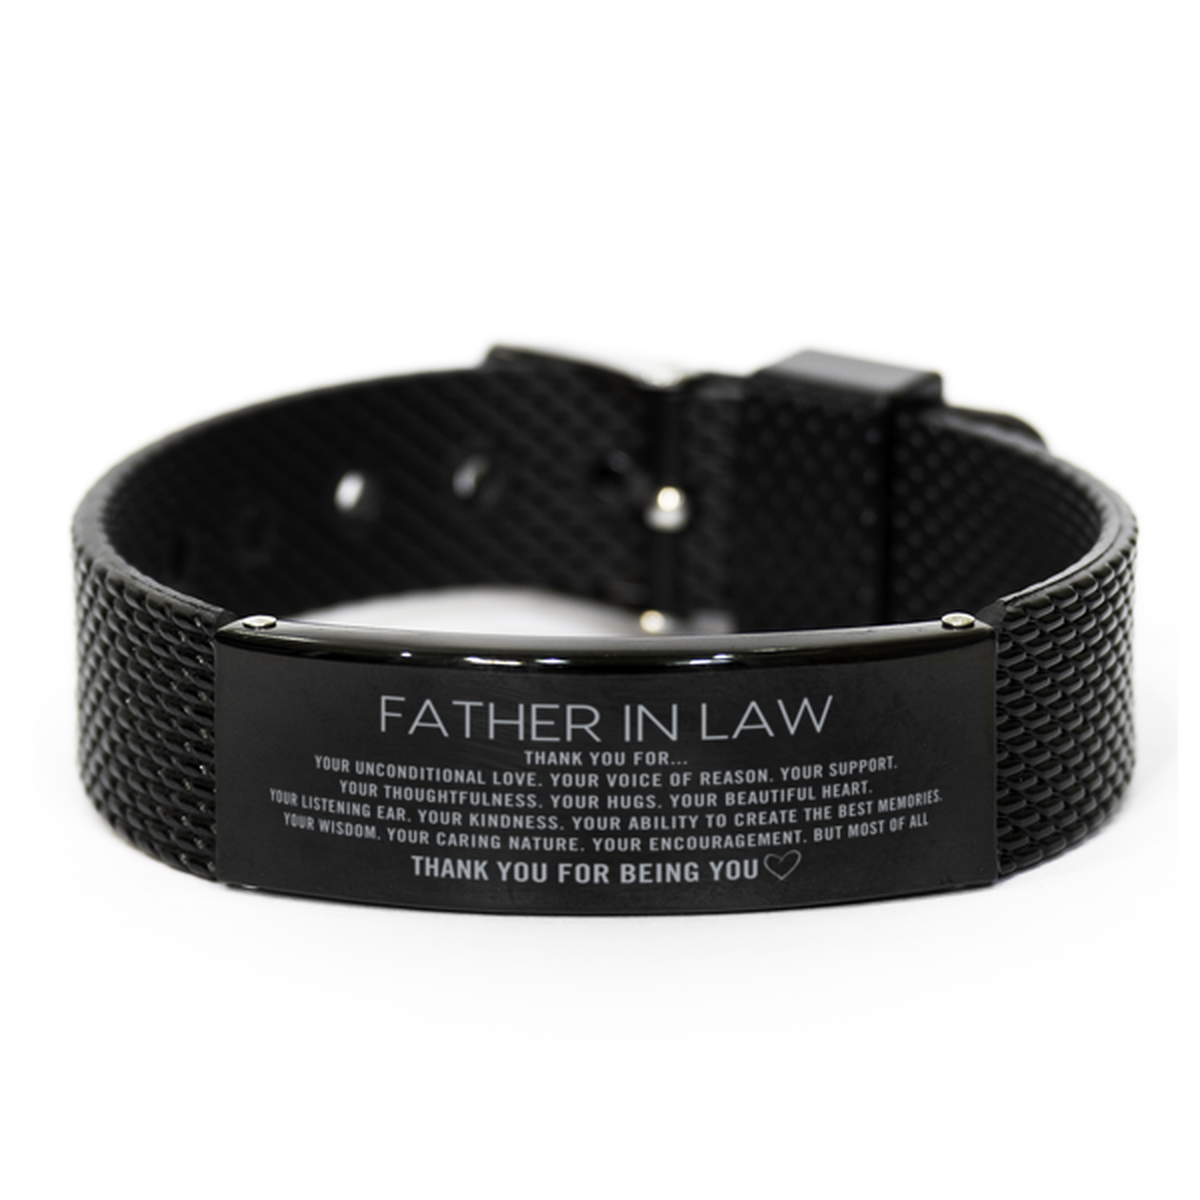 Father In Law Black Shark Mesh Bracelet Custom, Engraved Gifts For Father In Law Christmas Graduation Birthday Gifts for Men Women Father In Law Thank you for Your unconditional love